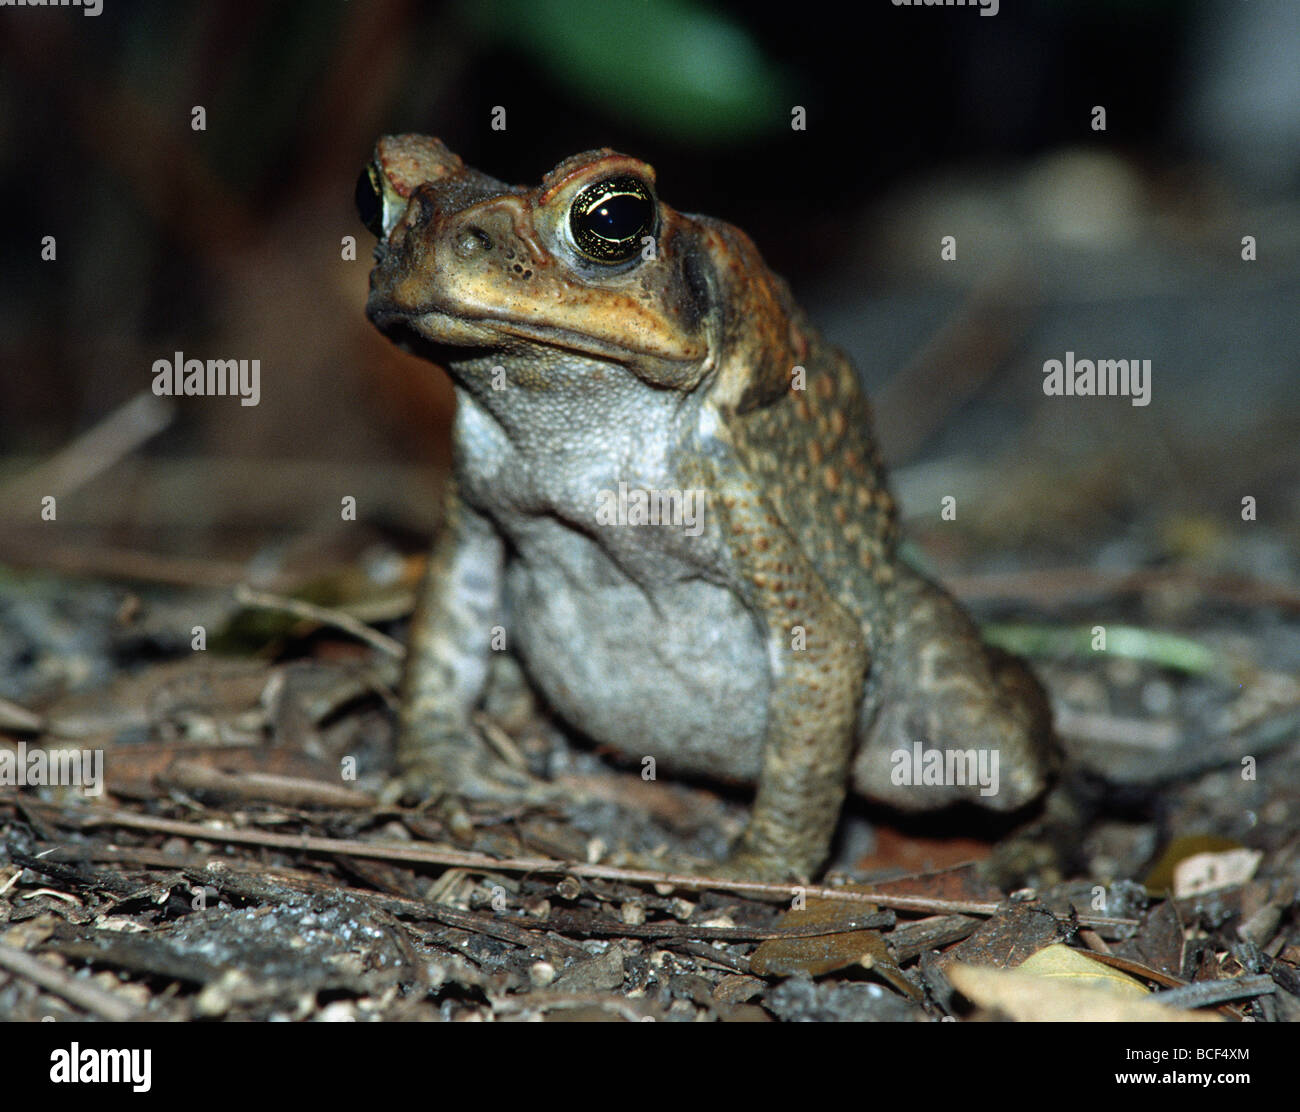 Cane Toad, Bufo marinus This toad is considered the most introduced amphibian in the world and is widely considered a pest. Stock Photo